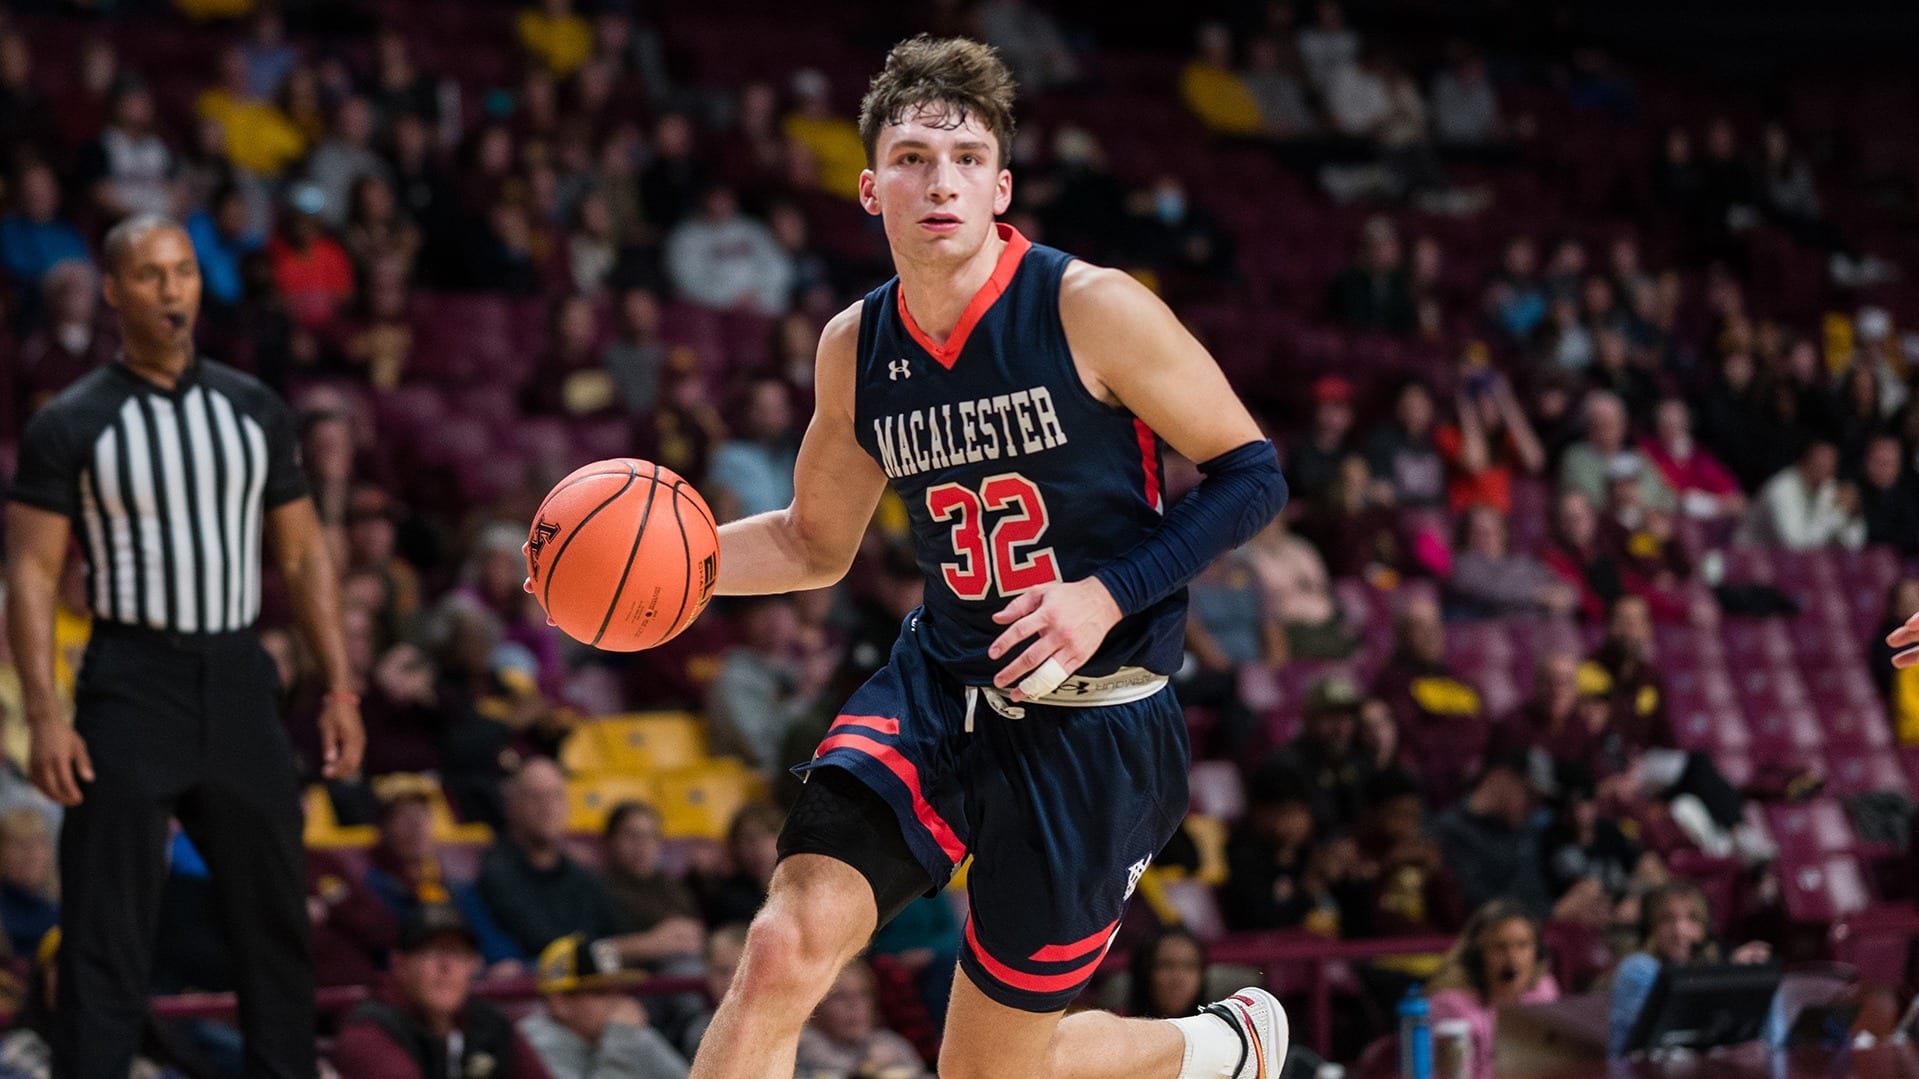 Gophers interested in Macalester transfer Caleb Williams